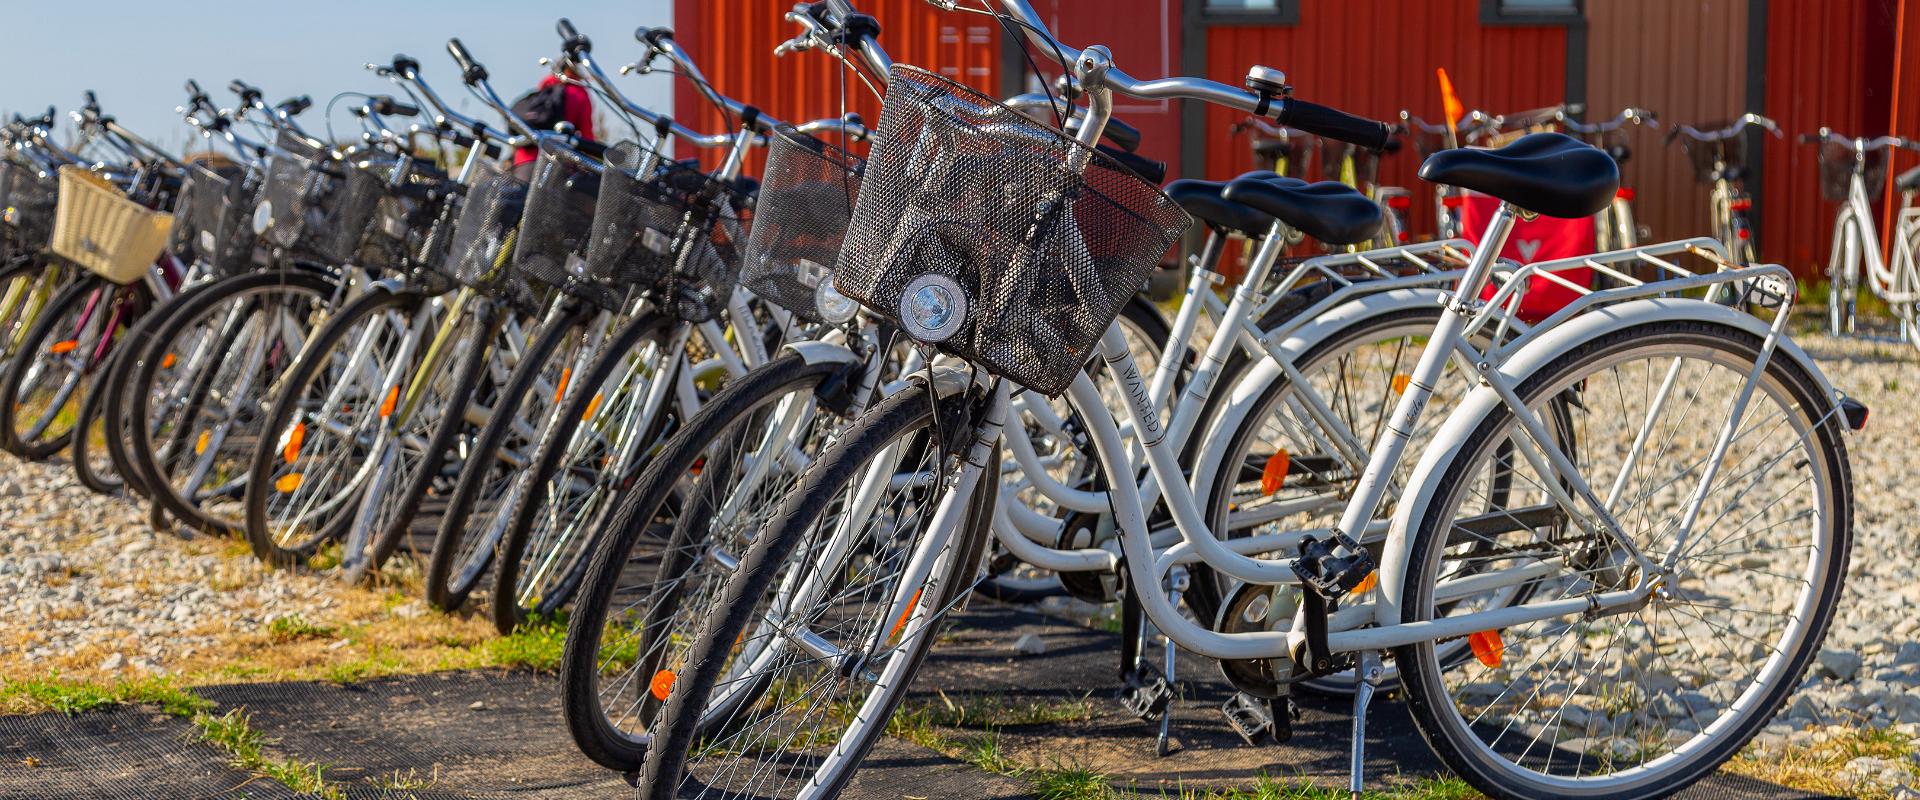 You can rent bikes right at the Kihnu harbour! The rental has bikes for all ages; we have bicycles for women, for men and for children. Helmets, child